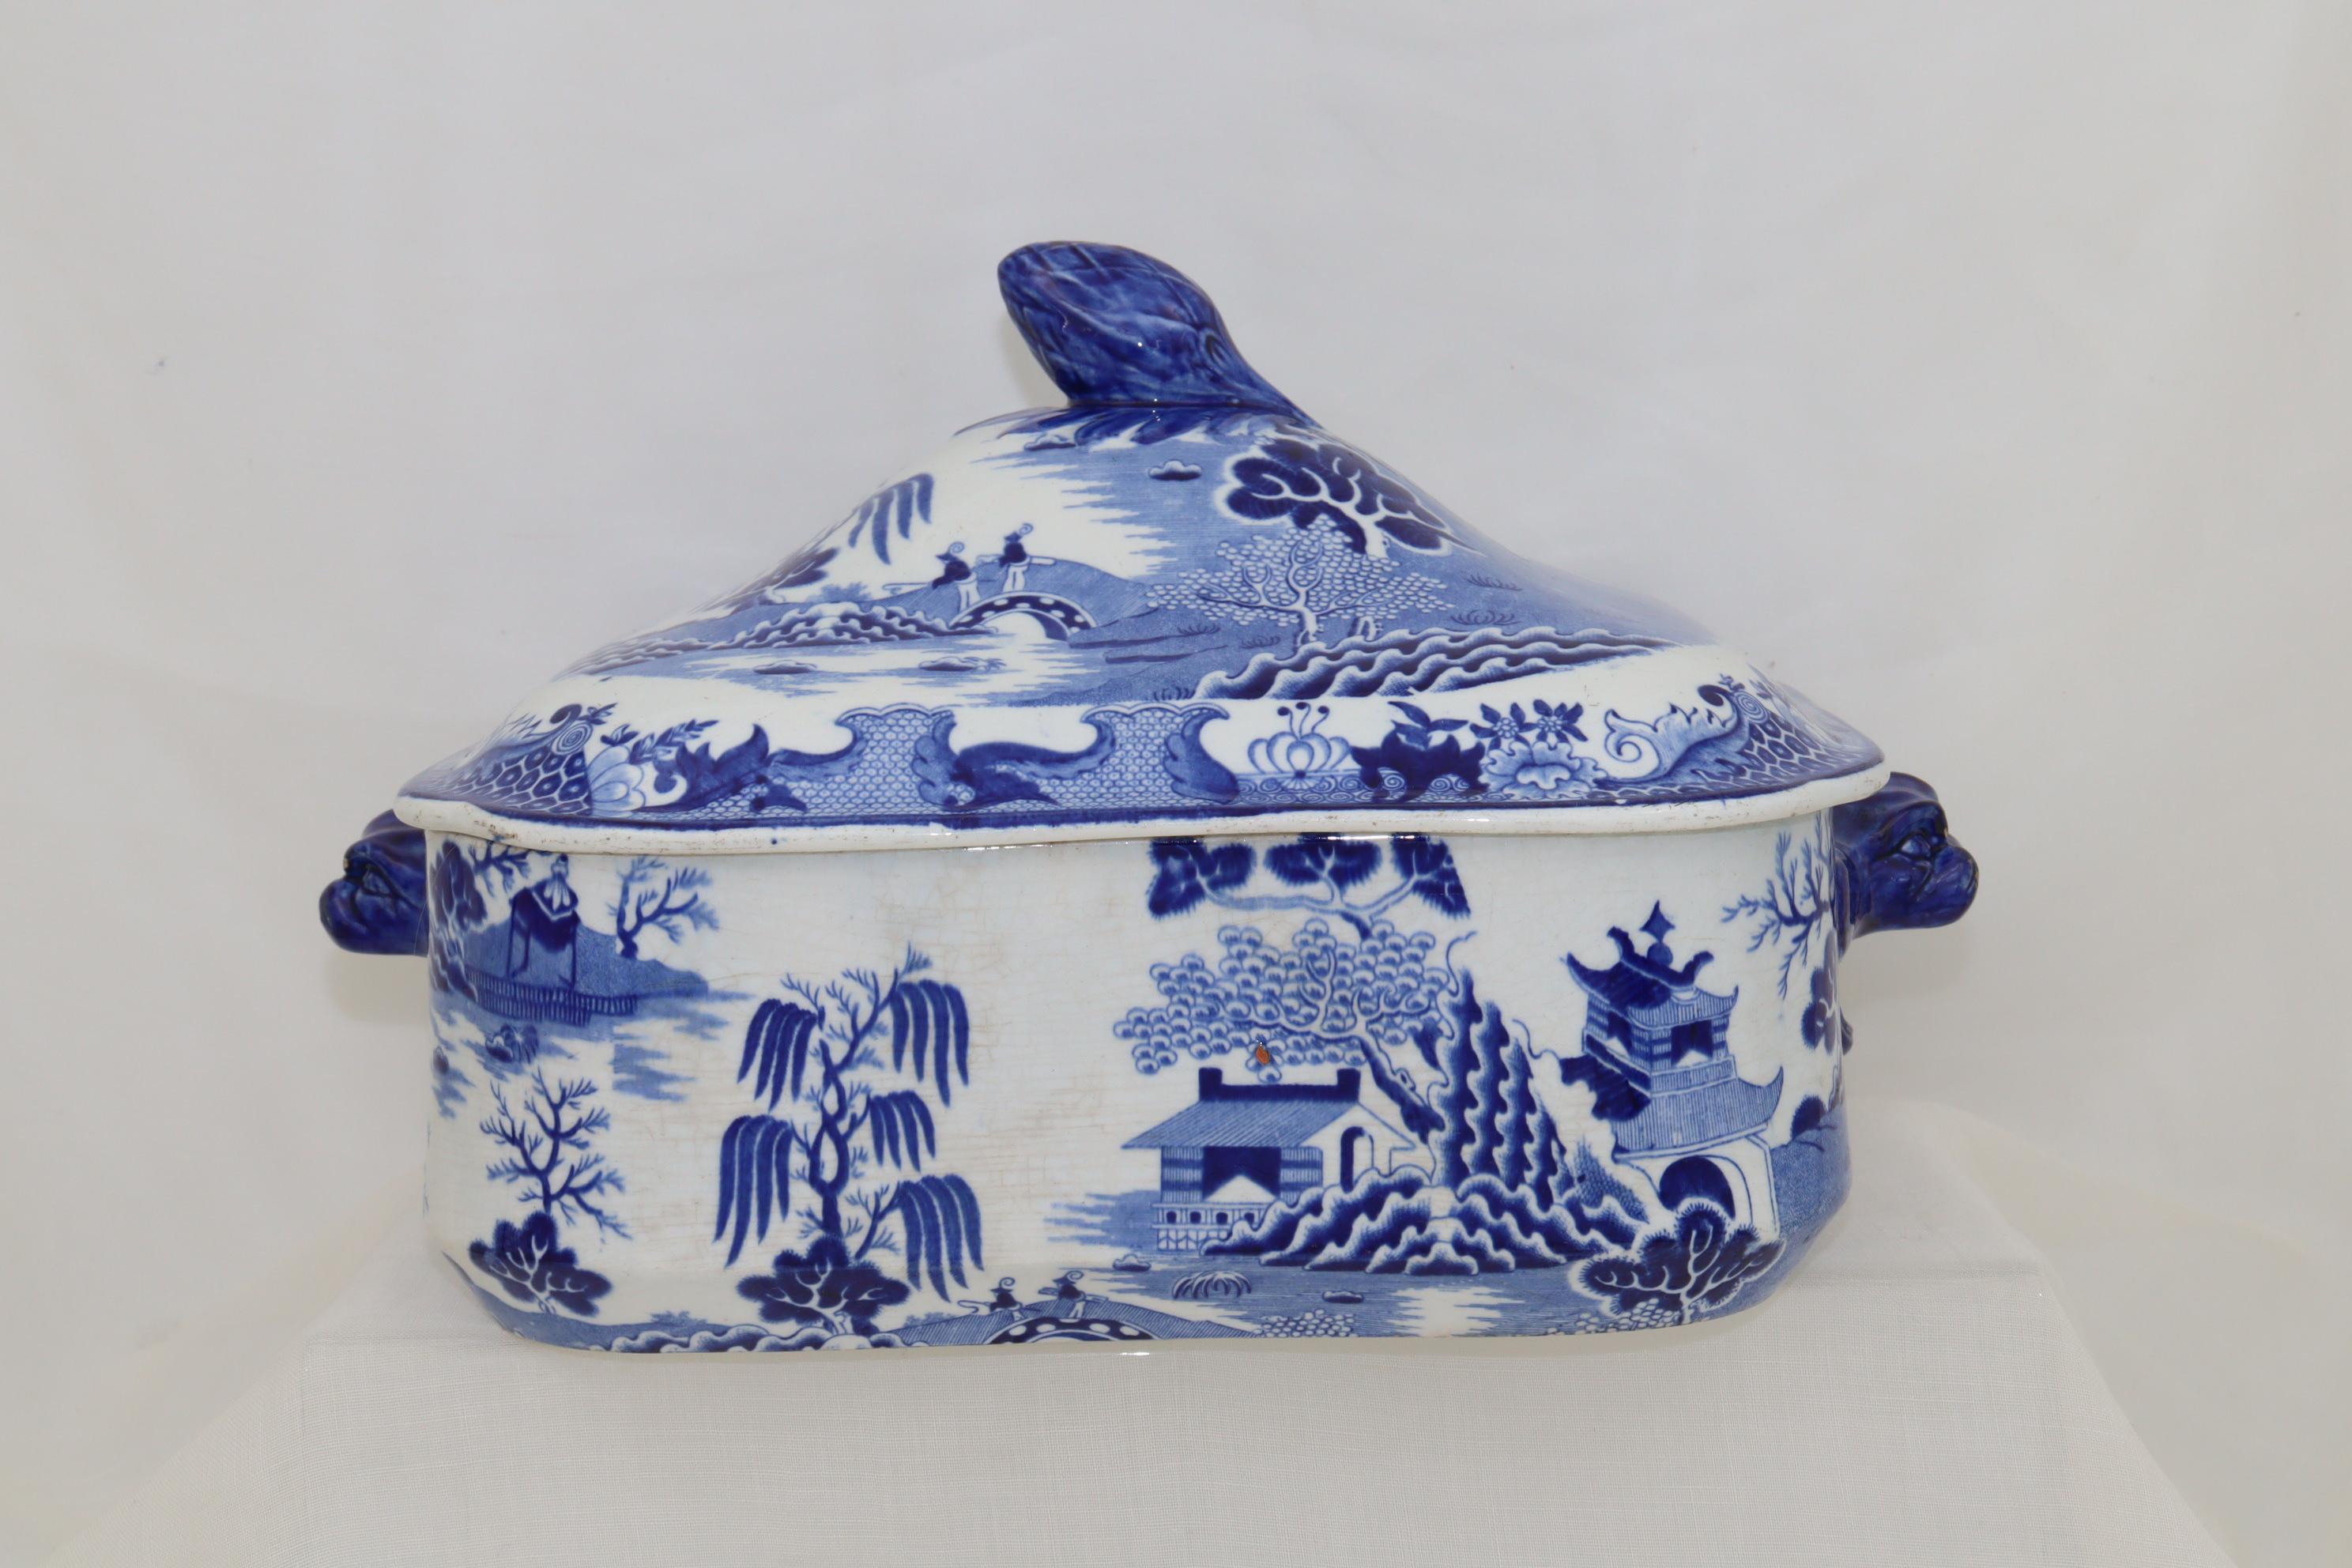 This good sized blue and white tureen is attributed to Turner's of Lane End, in Staffordshire. It is decorated with the printed pattern later known as Turner's Willow. Following Turner's bankruptcy, this pattern was used by Miles and William Mason